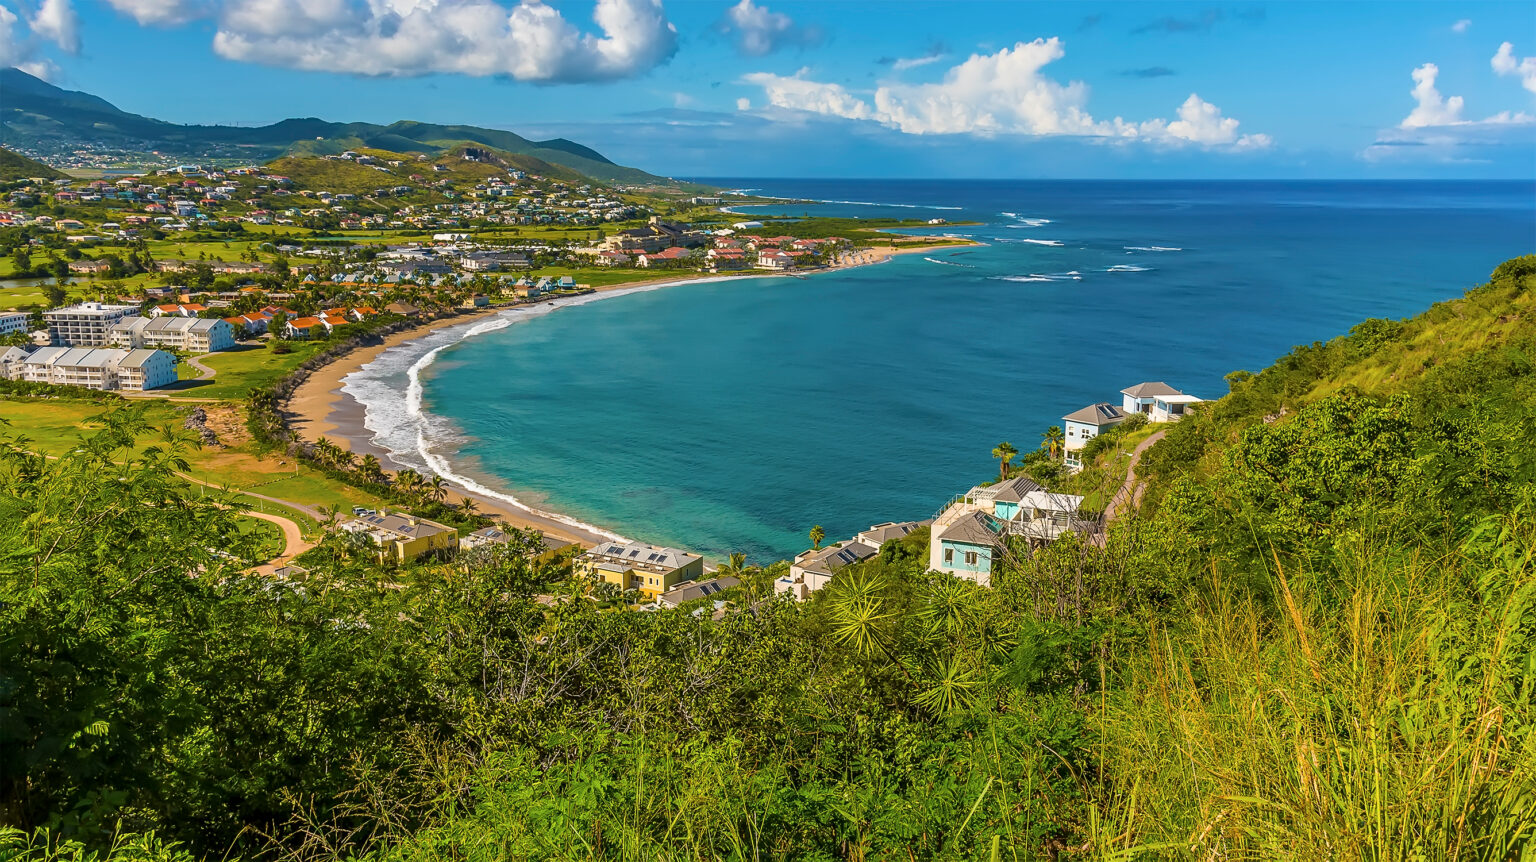 The,View,Looking,North,From,Timothy,Hill,In,St,Kitts